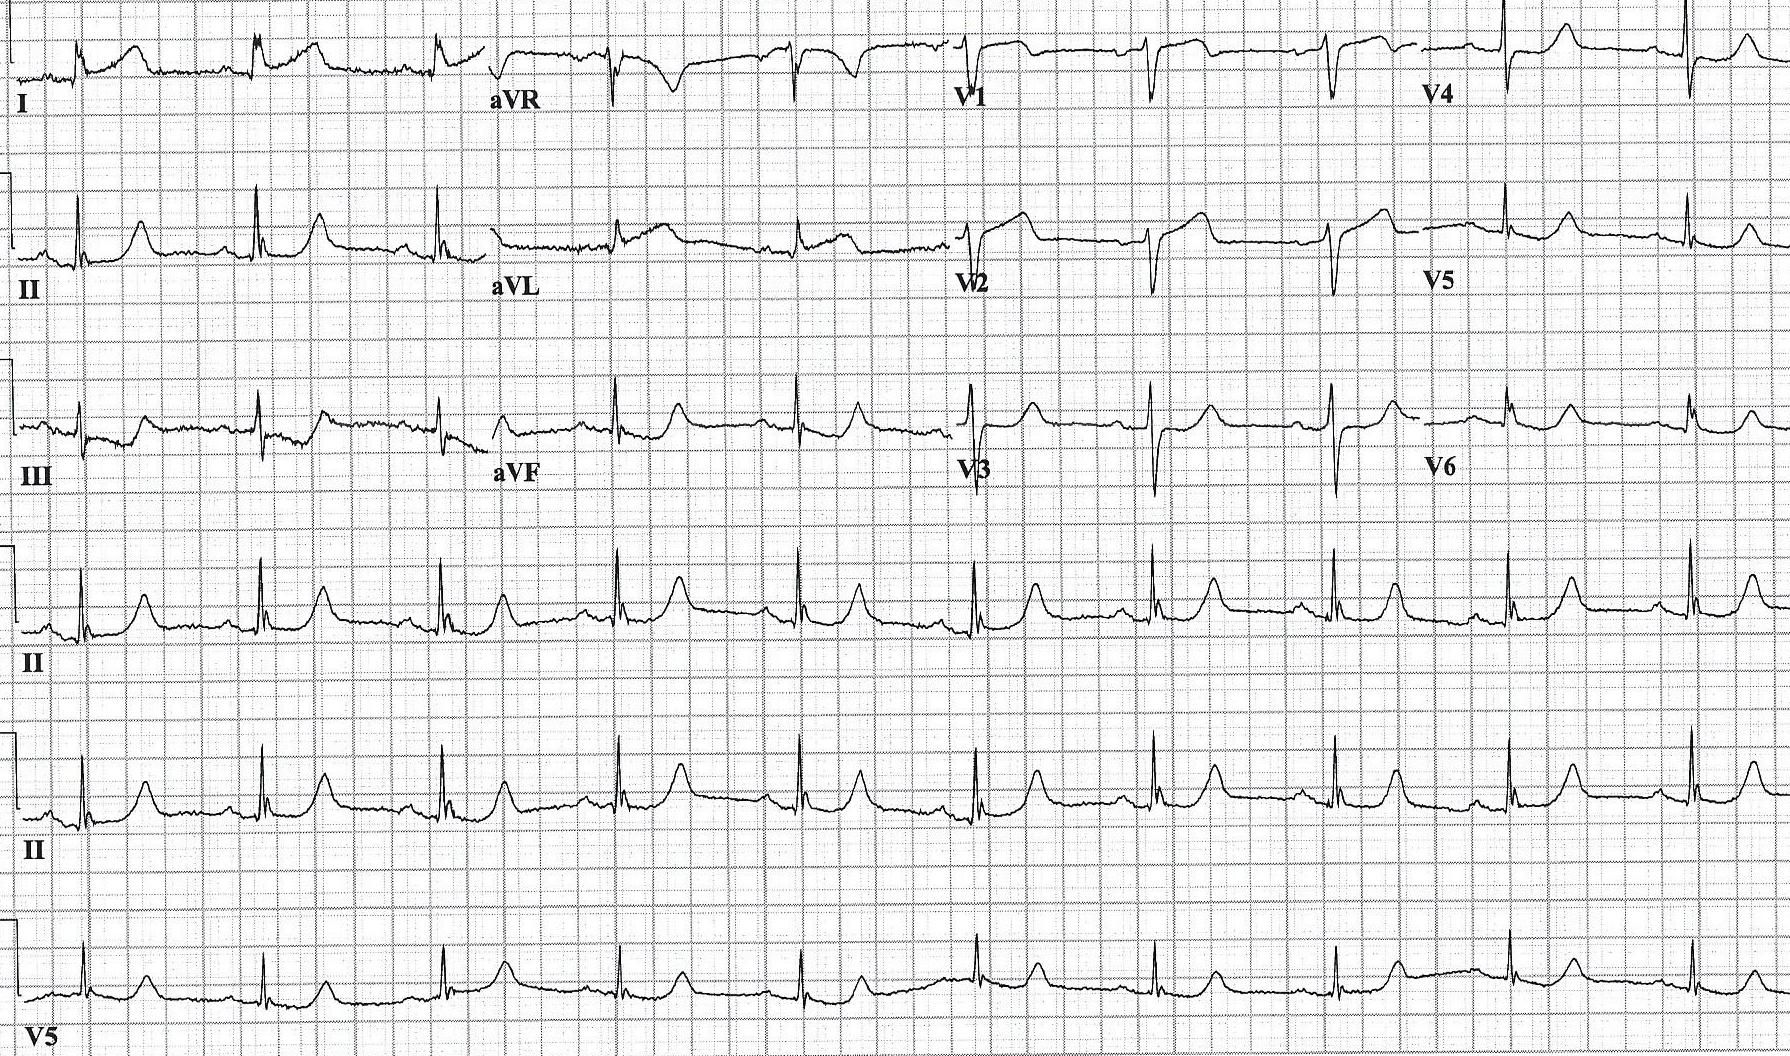 Cardiology Case Report: Waxing and Waning Chest Pain